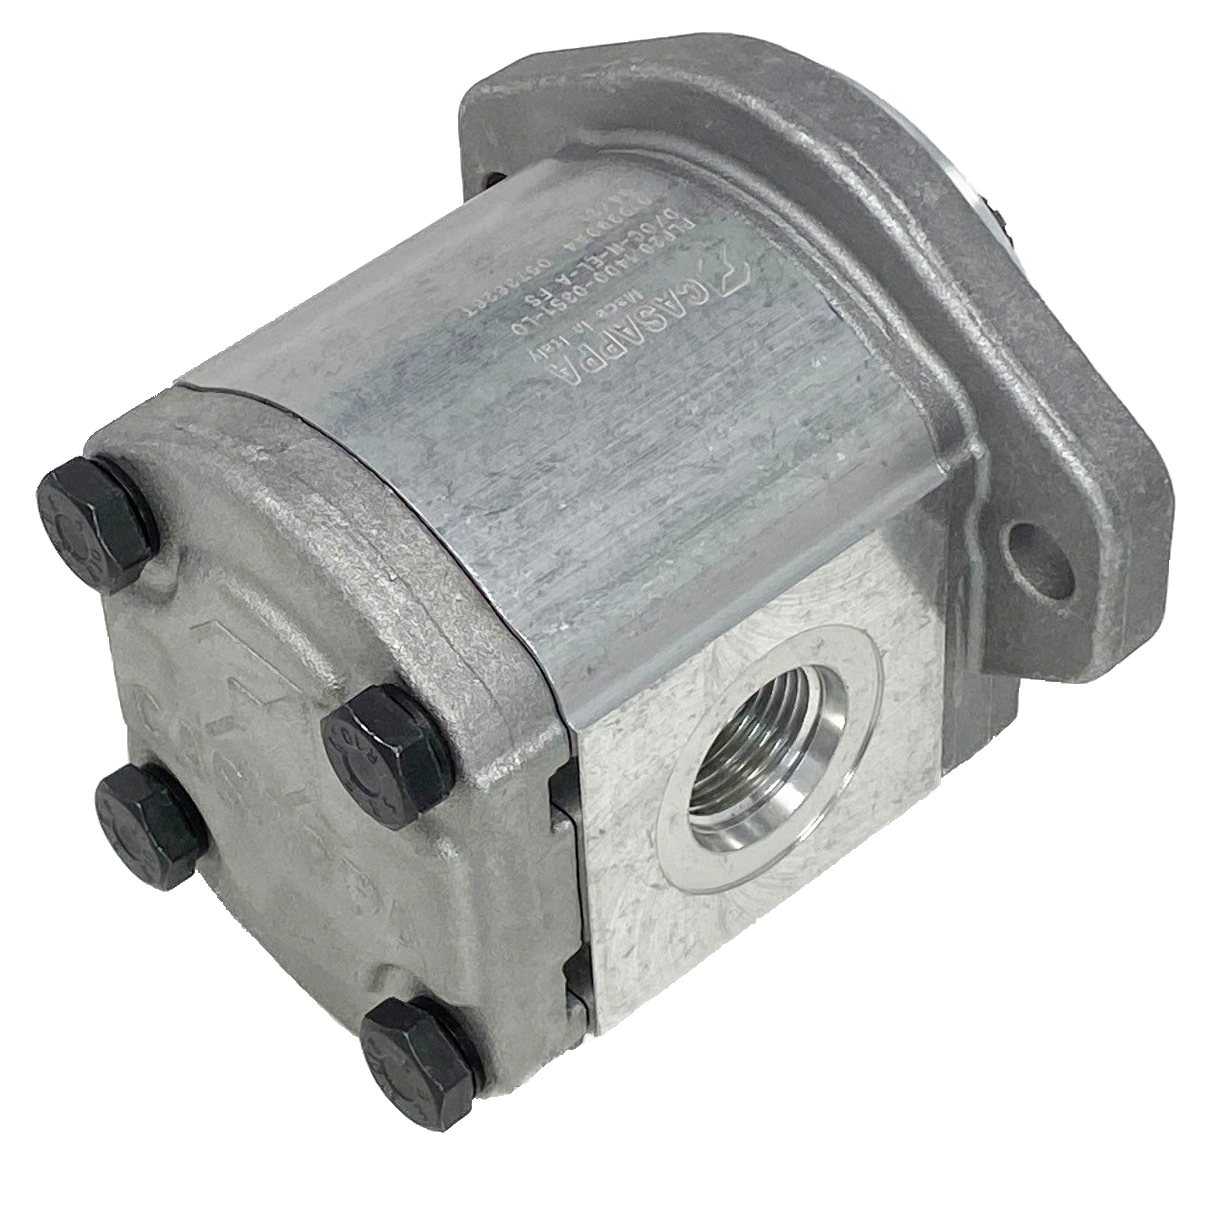 PLP20.14S0-31S1-LOF/OC-S7-N-EL-FS : Casappa Polaris Gear Pump, 14.53cc, 3625psi Rated, 3500RPM, CCW, 5/8" Keyed Shaft, SAE A 2-Bolt Flange, 1" #16 SAE Inlet, 0.625 (5/8") #10 SAE Outlet, Aluminum Body & Flange